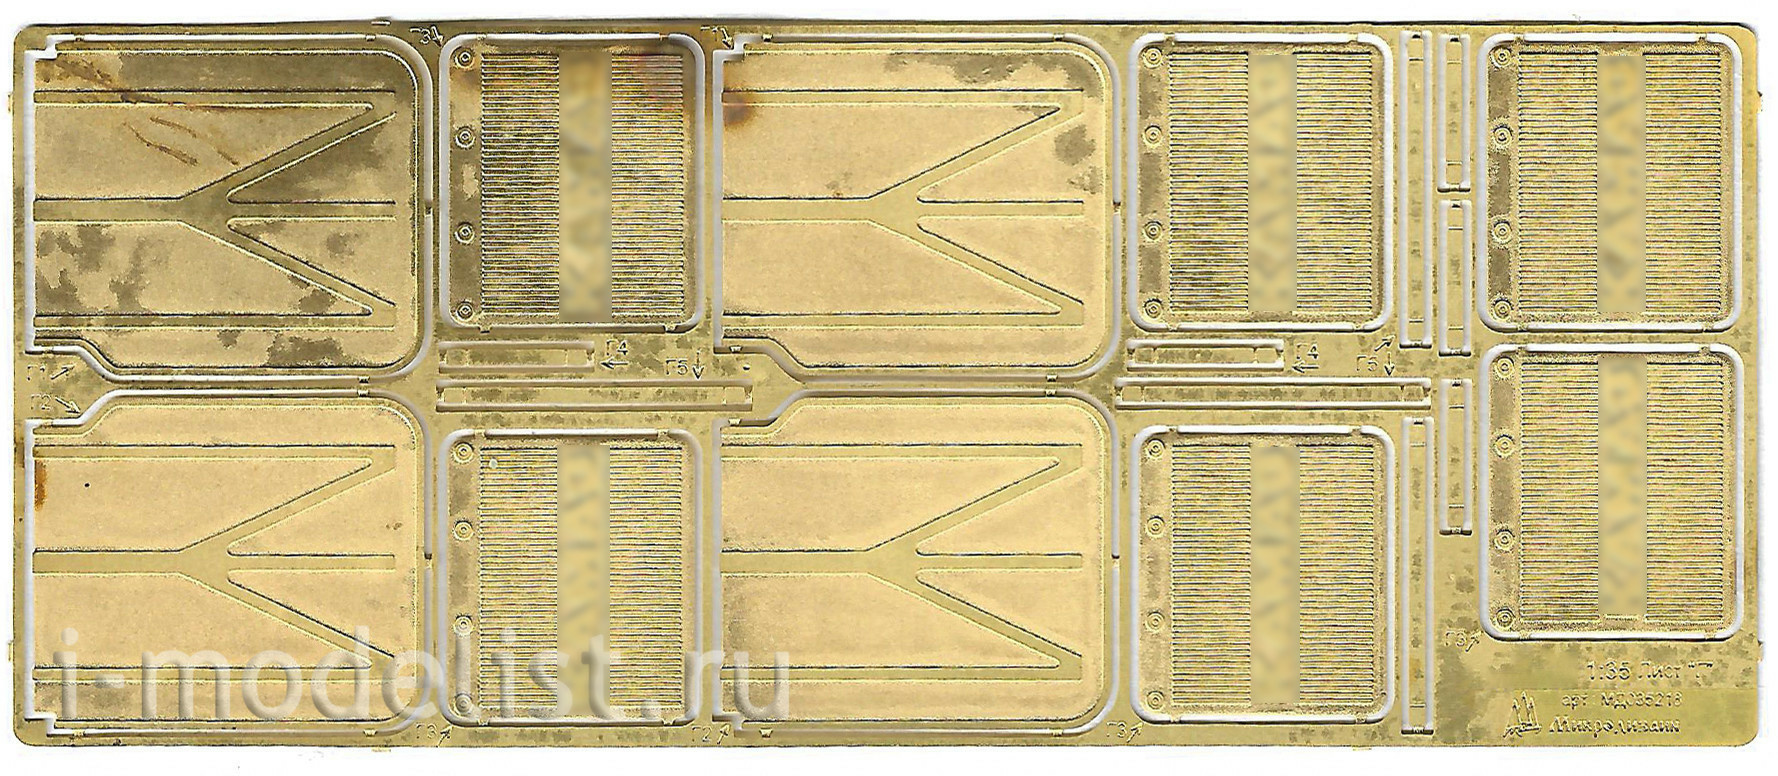 035218 Microdesign 1/35 photo-etched for CAMAS from ICM